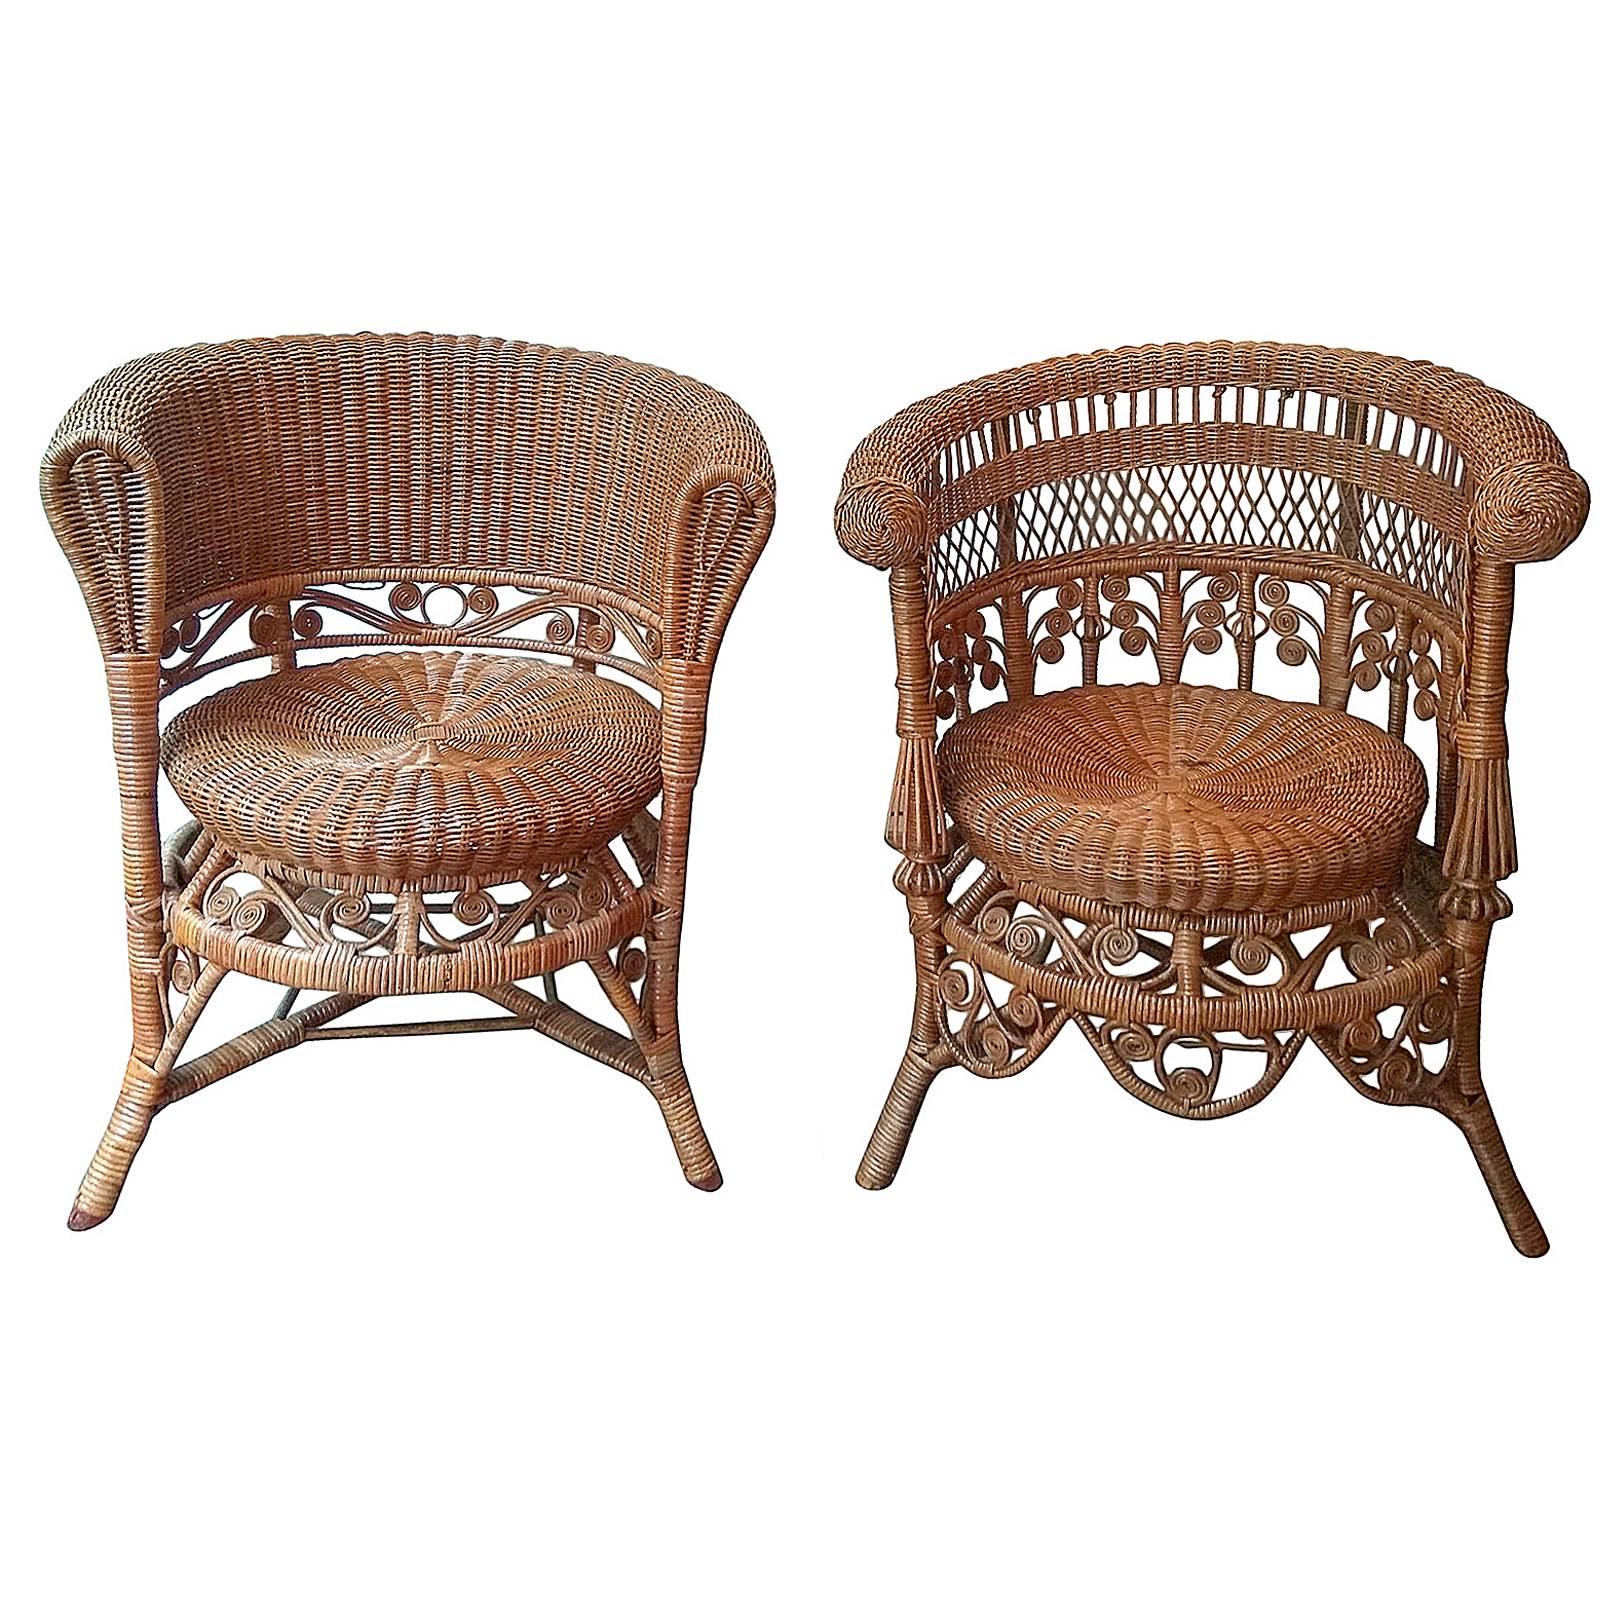 False Pair of Two Rattan Armchairs in the Style of Heywood Brothers & Wakefield 